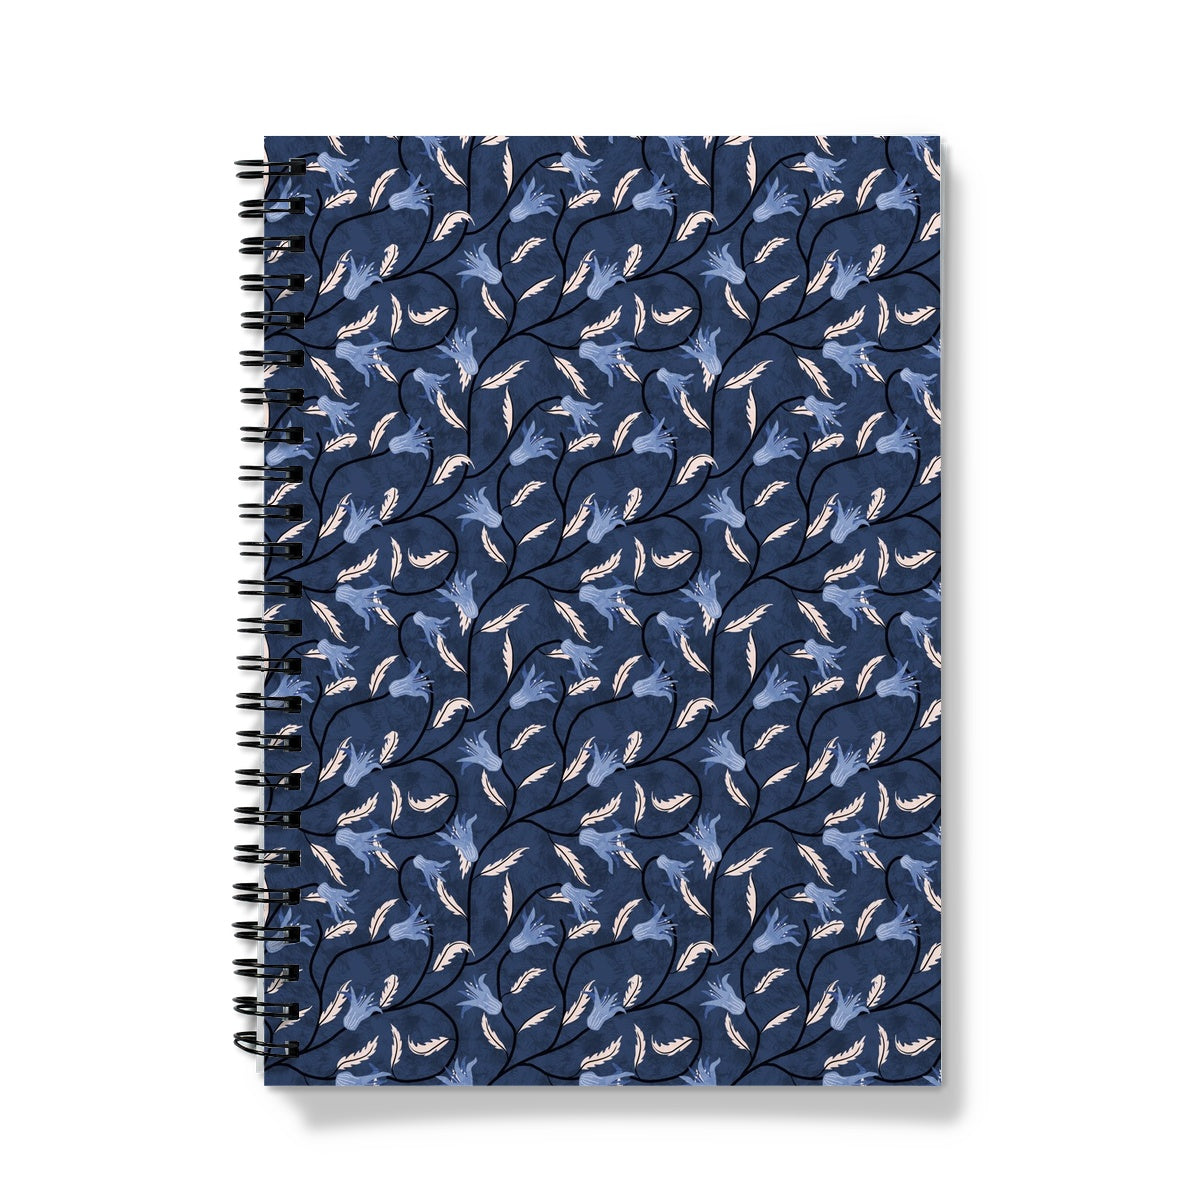 Bluebell Symphony: Serene Shades of Blue Notebook